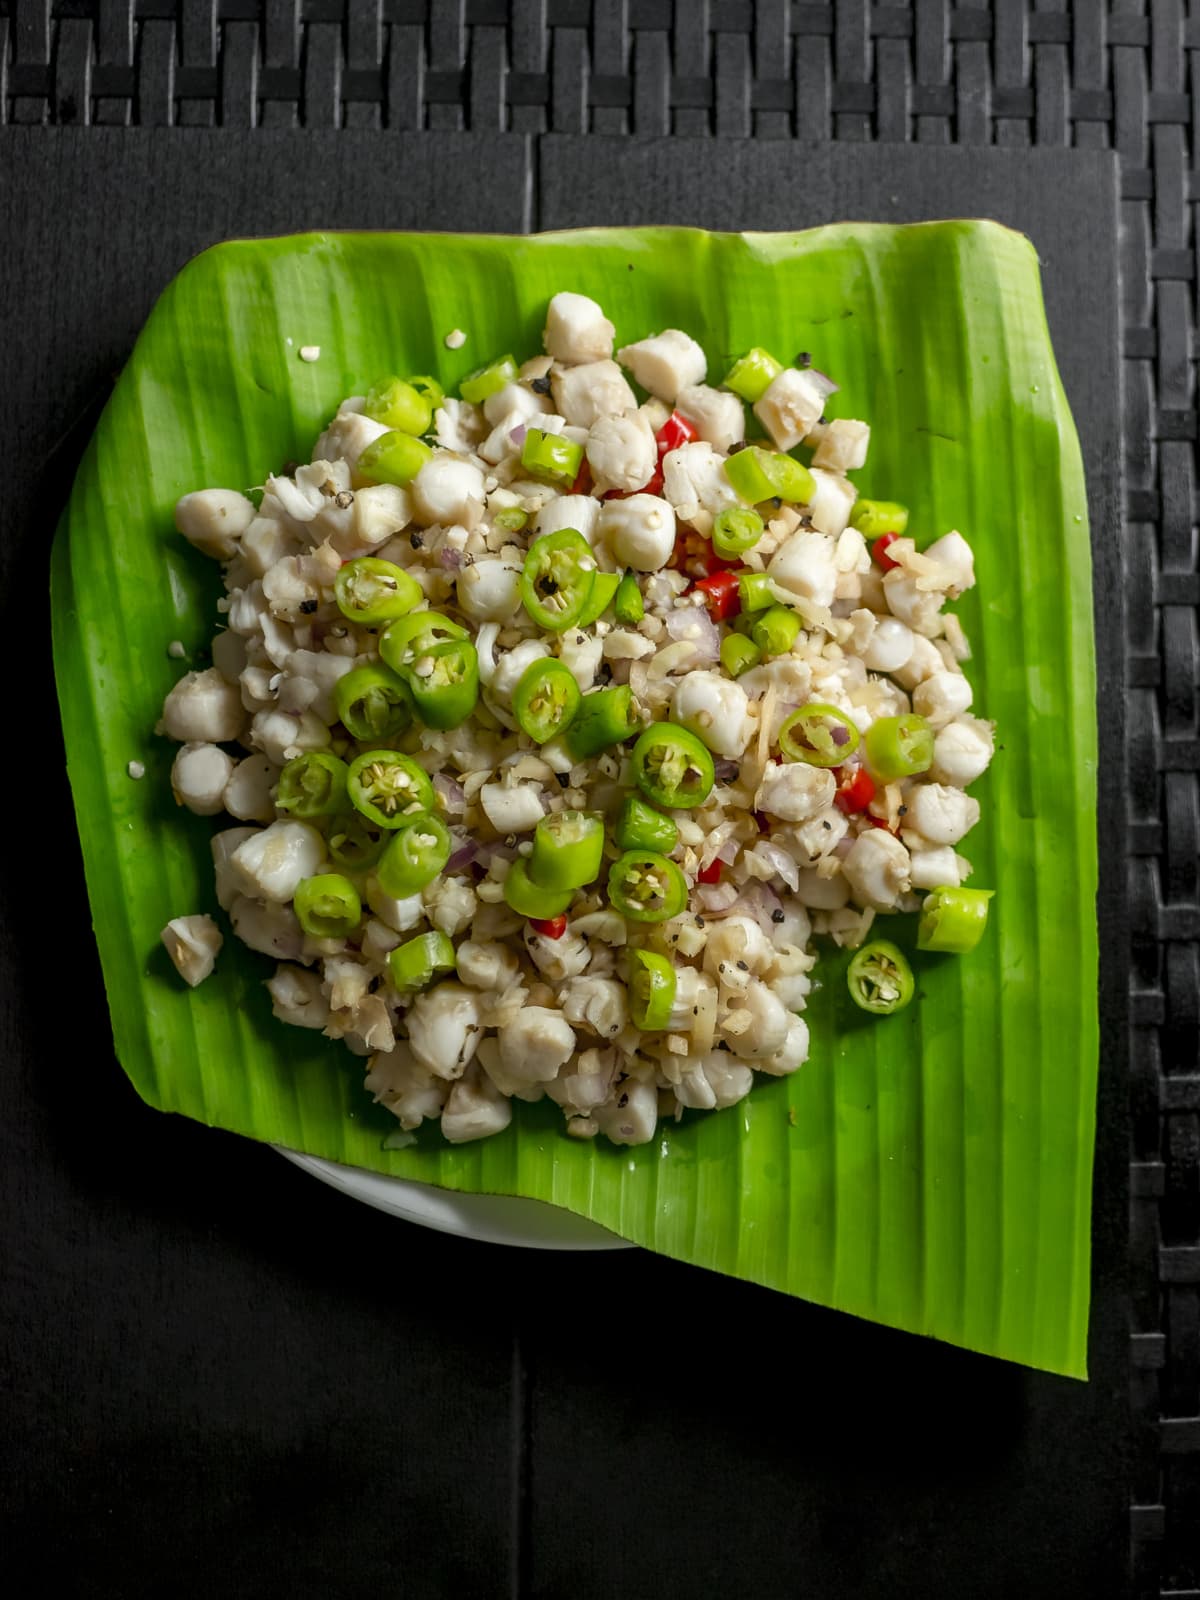 Top view of Scallop Ceviche , also known as Kinilaw na Scallops. Chopped and mixed with chilies. On a plate covered with a banana leaf.